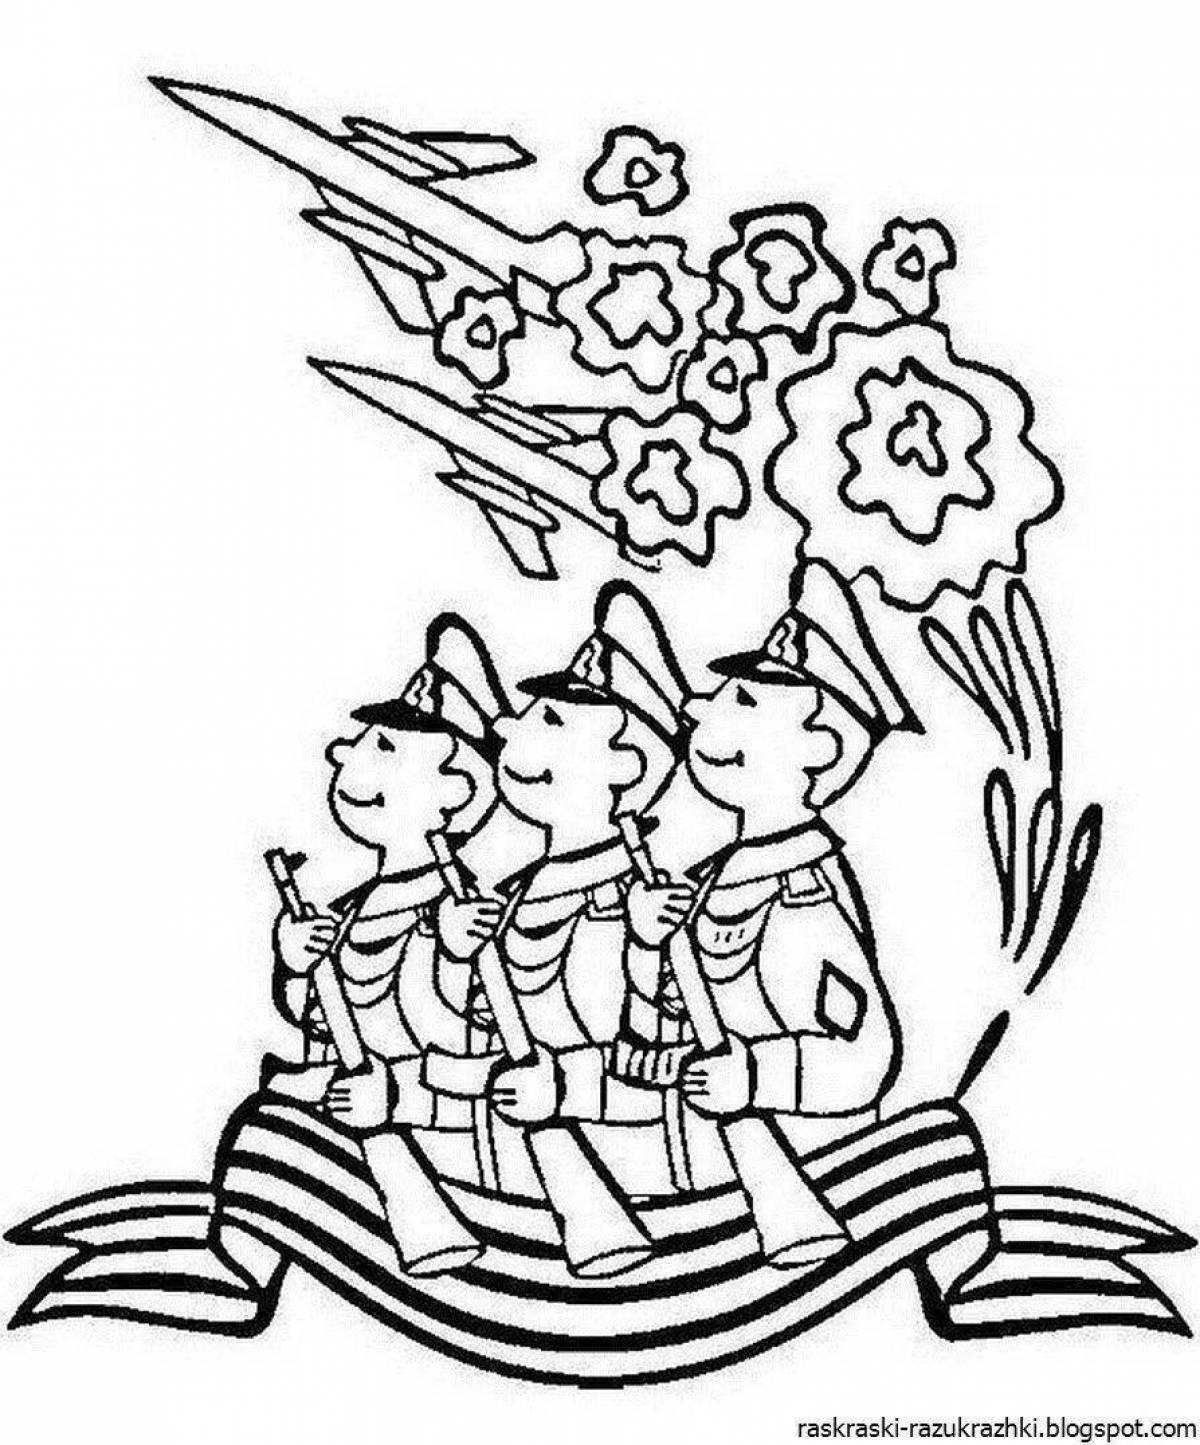 Gorgeous military tank badge coloring page